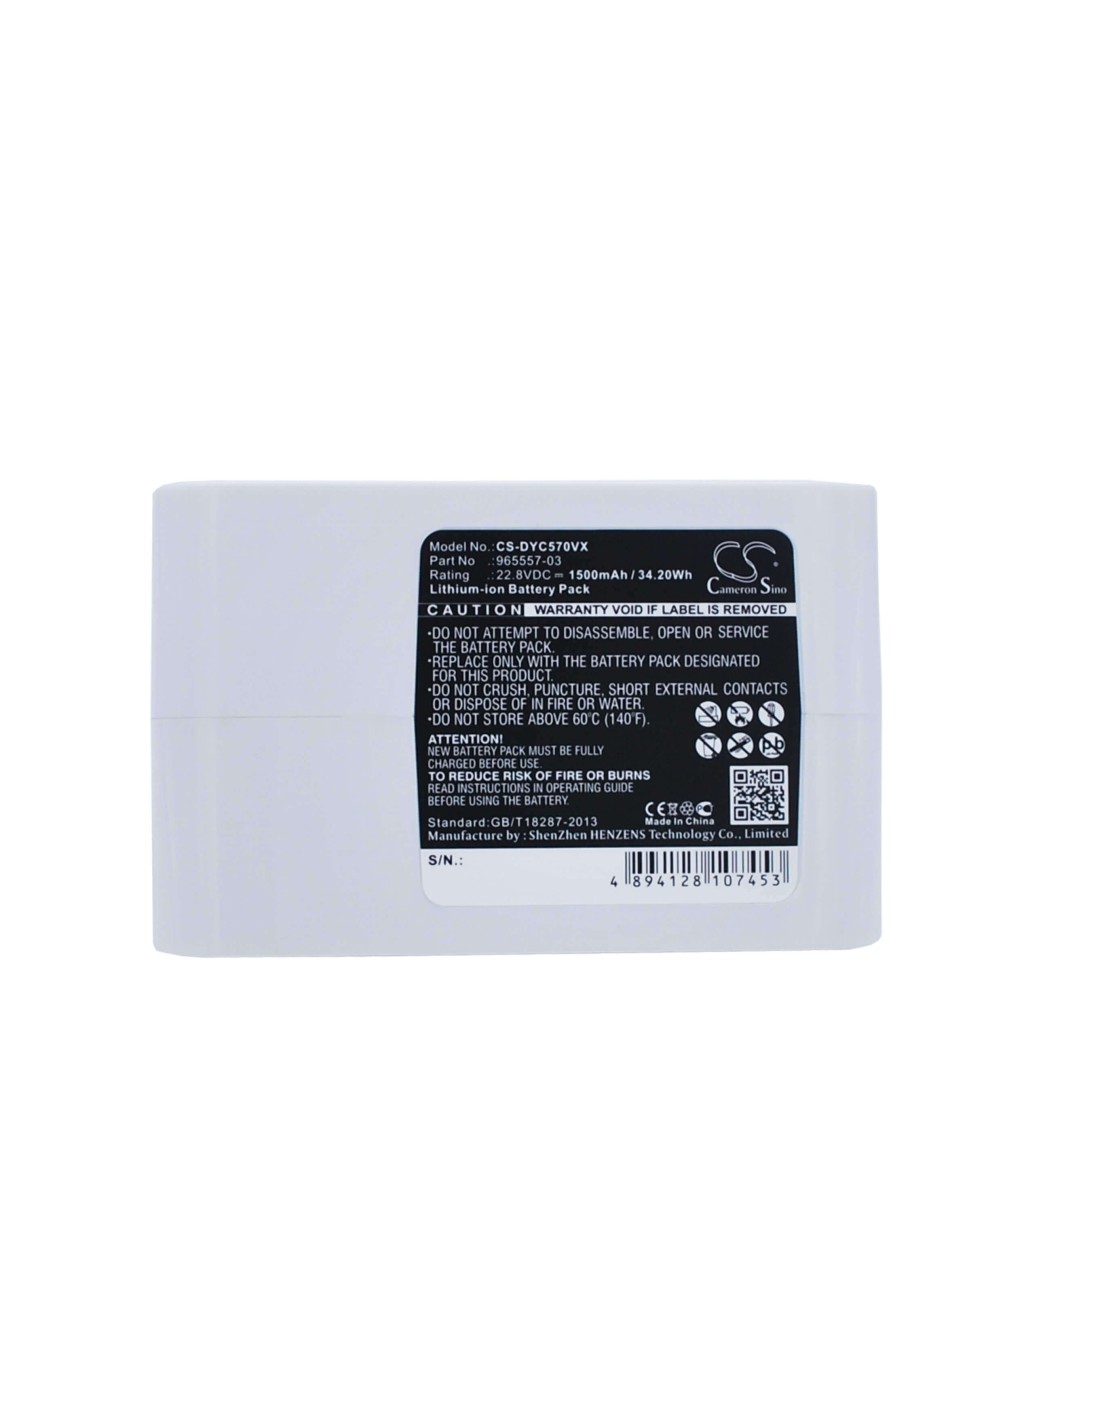 Battery for Dyson Dc31 Animal, Dc34, Dc35 Type B, 22.8V, 1500mAh - 34.20Wh